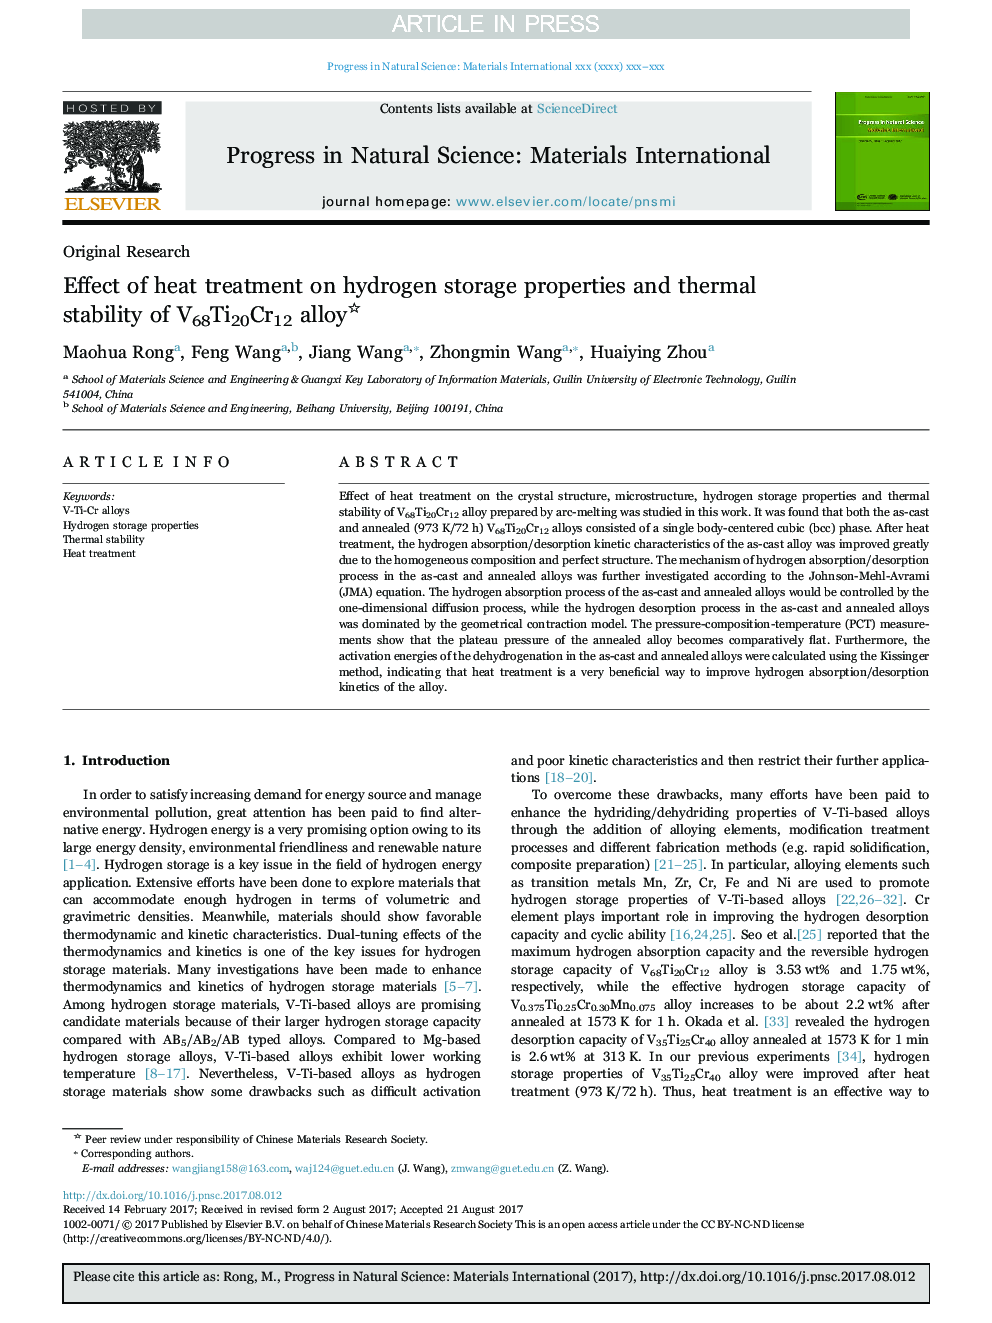 Effect of heat treatment on hydrogen storage properties and thermal stability of V68Ti20Cr12 alloy